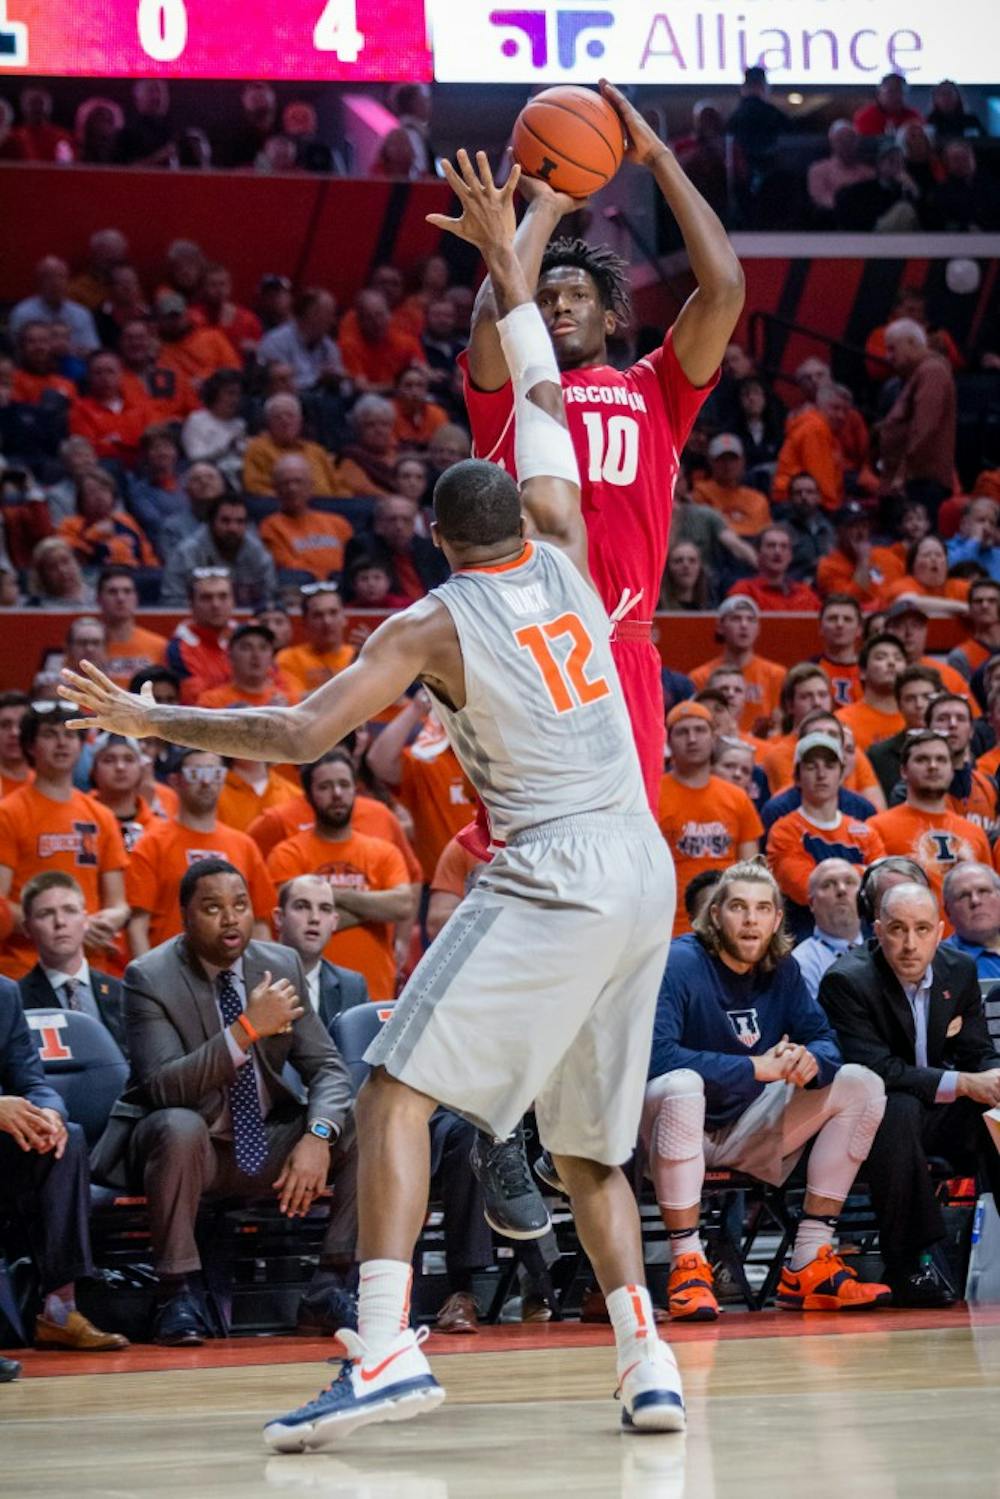 Wisconsin's Nigel Hayes (10) shoots a three over Illinois' Leron Black (12) during the game at State Farm Center on Tuesday, January 31.